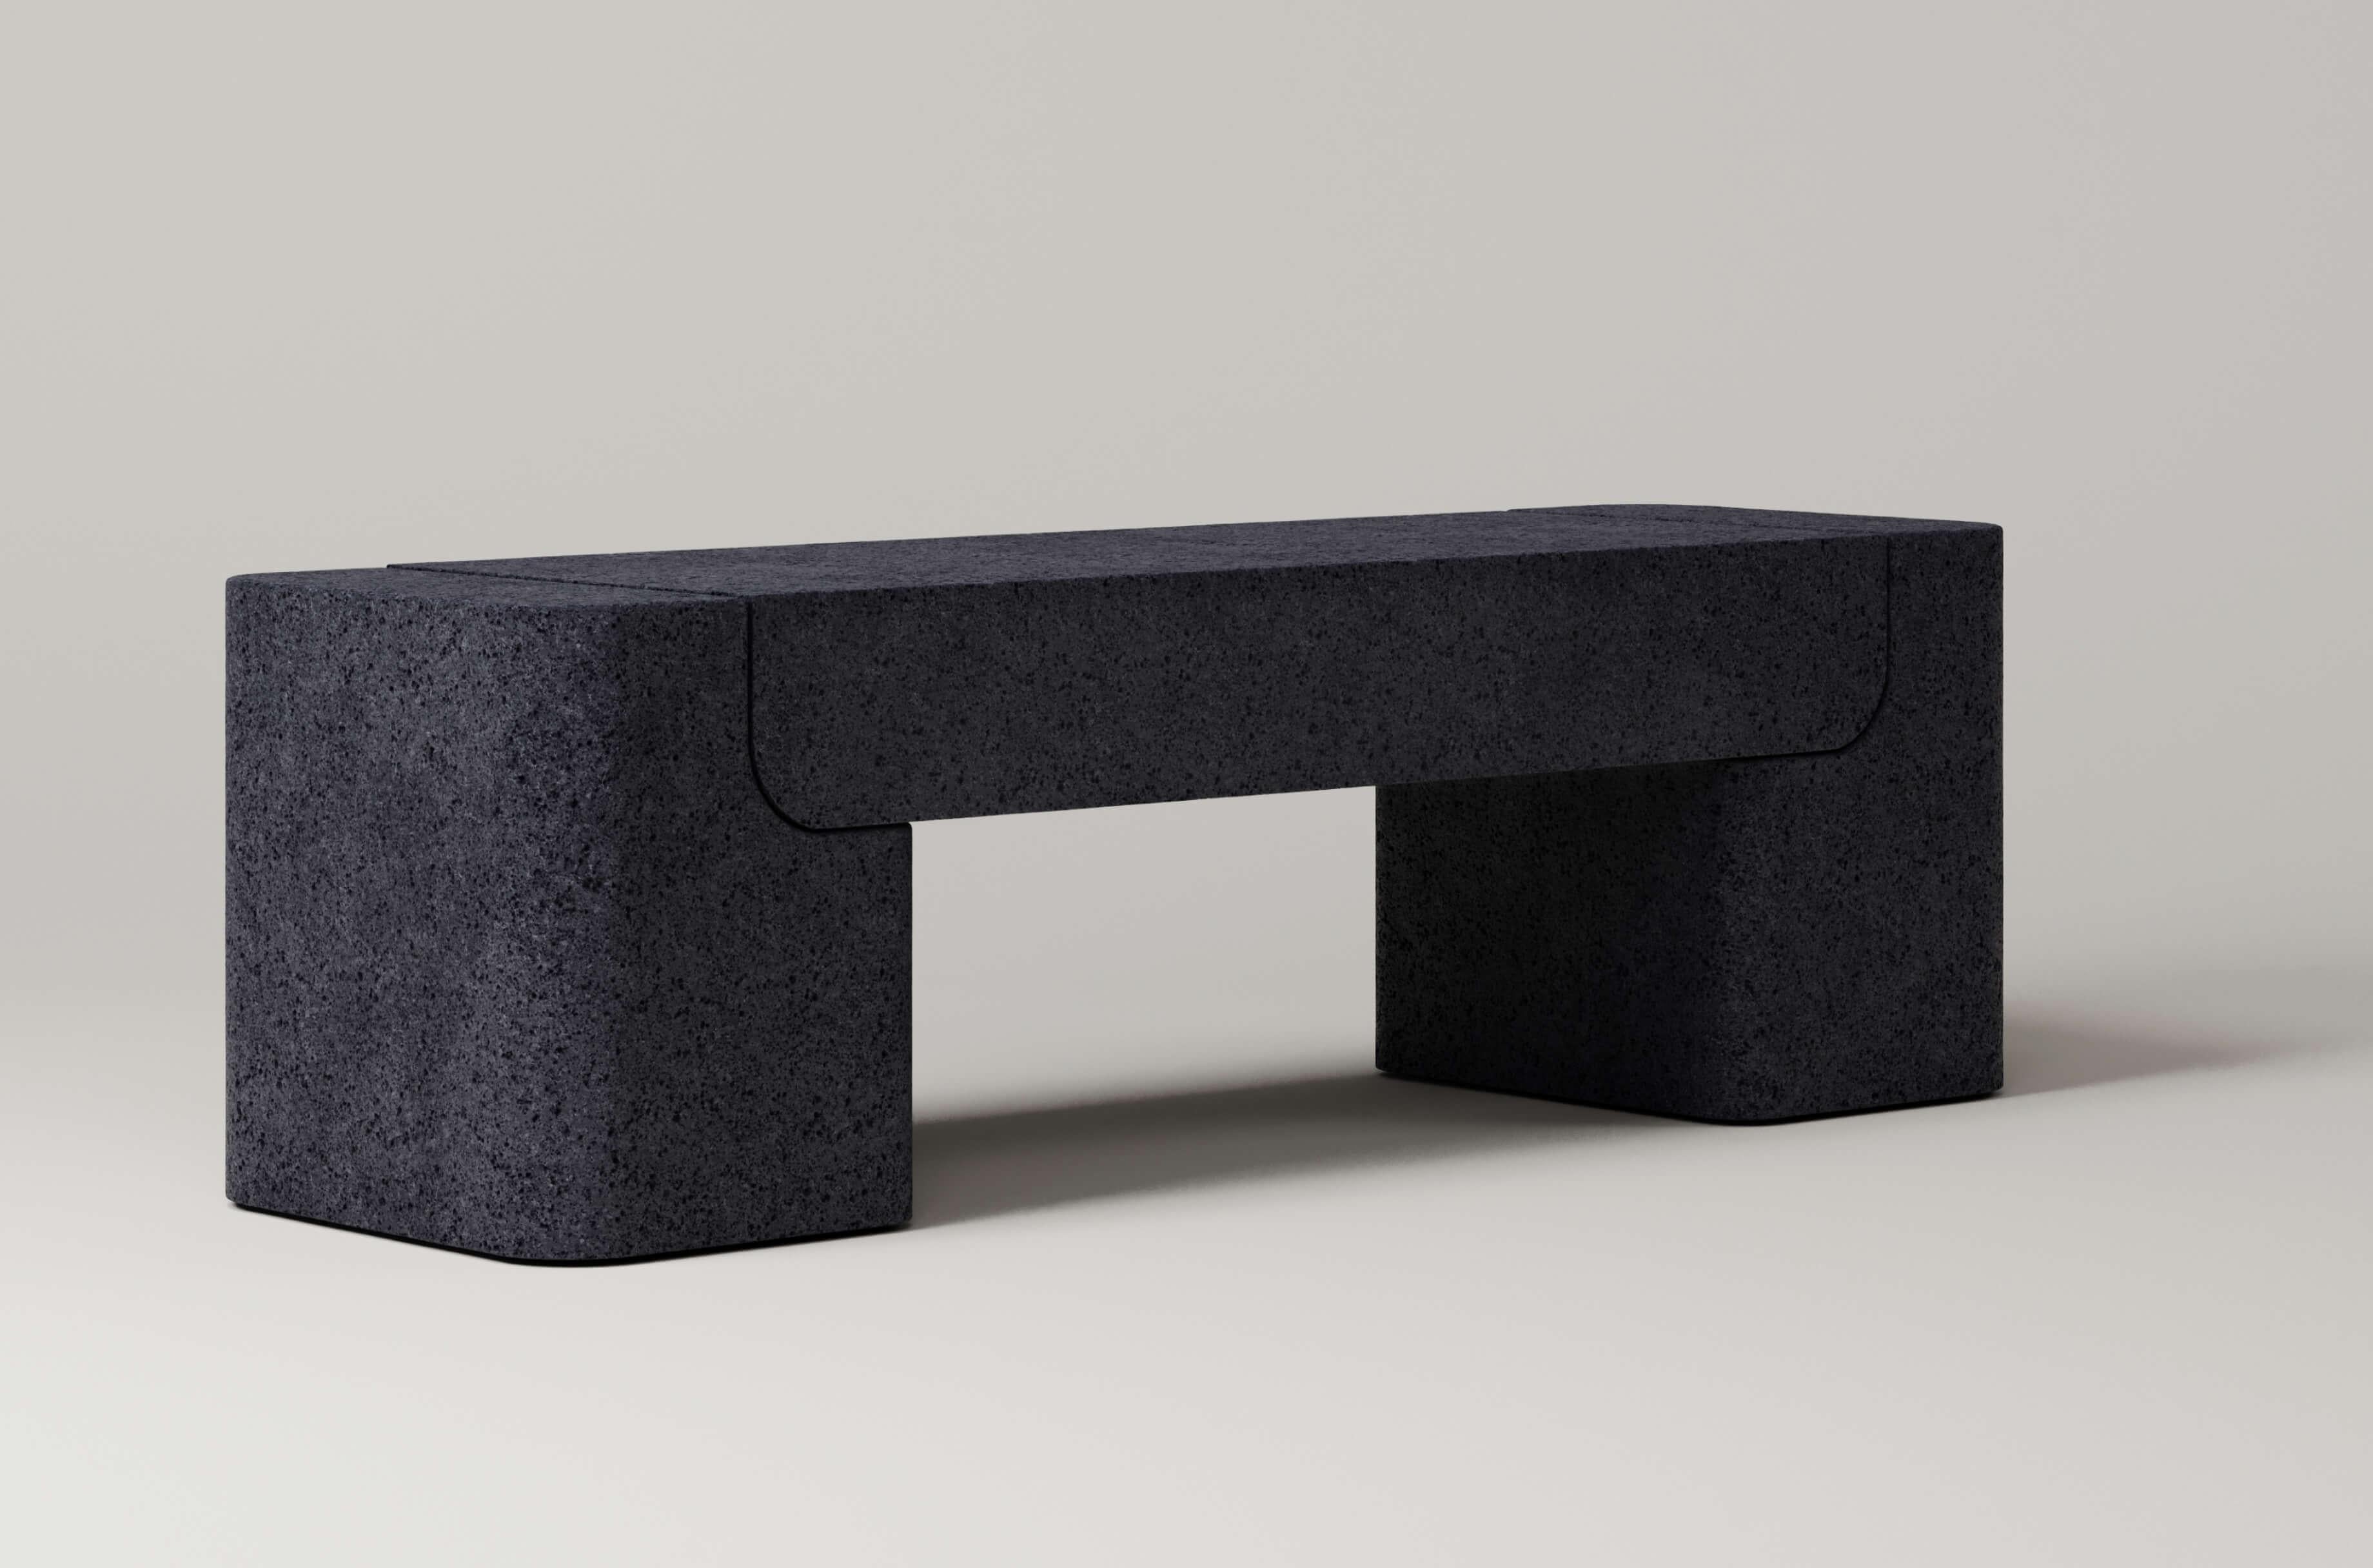 Crafted from 3 carefully constructed blocks, the curved figure of the M_005 Bench emphasizes the connection between its parts. It’s heavily proportioned parts appear to ‘float’ effortlessly above the ground.

Numbered, Signed, and includes